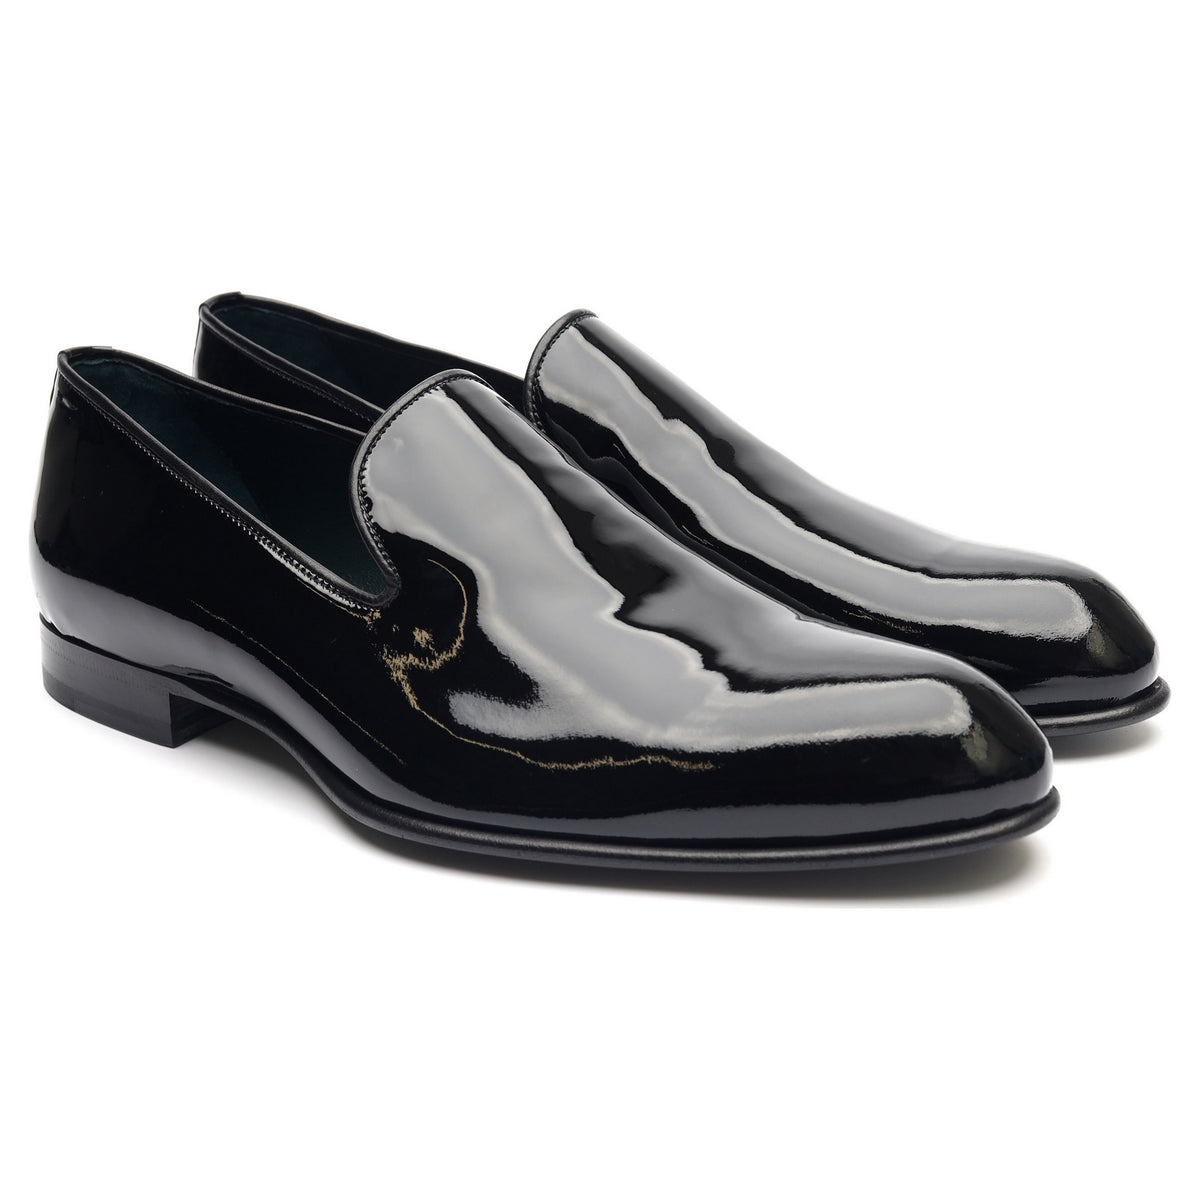 Black Patent Leather Evening Loafers UK 7.5